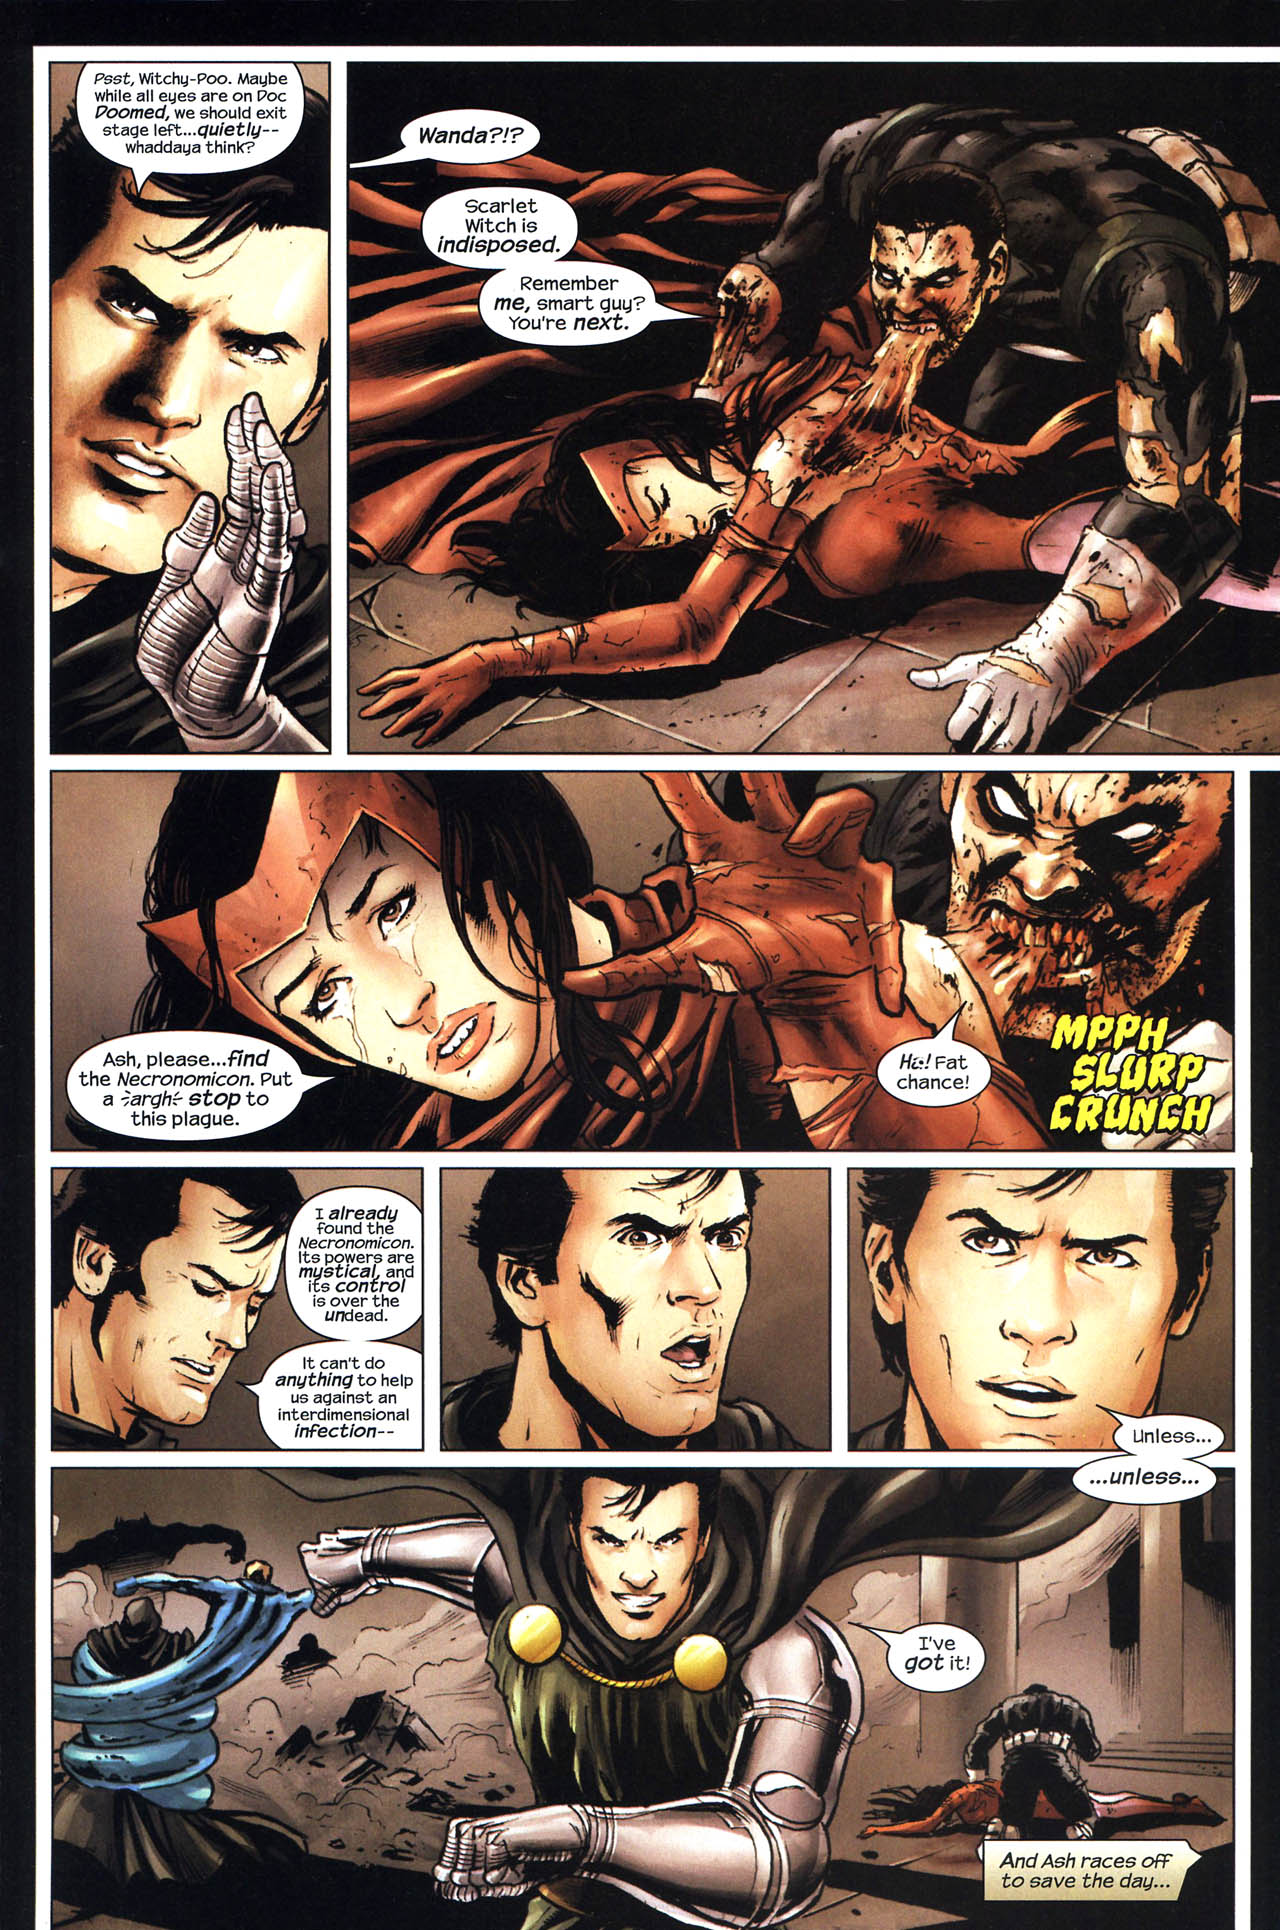 Marvel Zombies vs. Army of Darkness 5 of 5